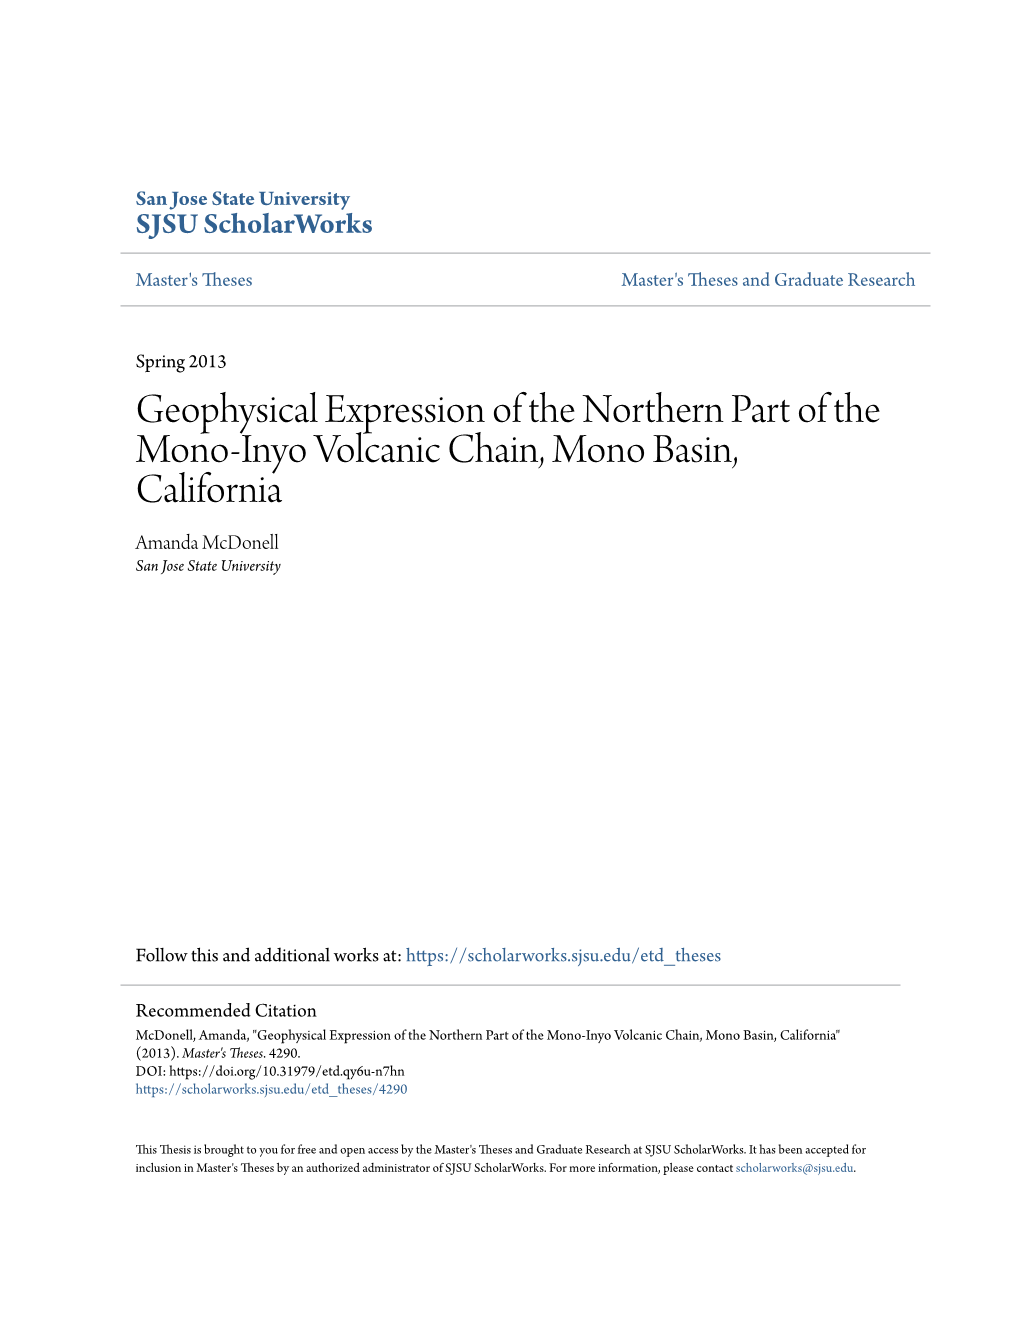 Geophysical Expression of the Northern Part of the Mono-Inyo Volcanic Chain, Mono Basin, California Amanda Mcdonell San Jose State University